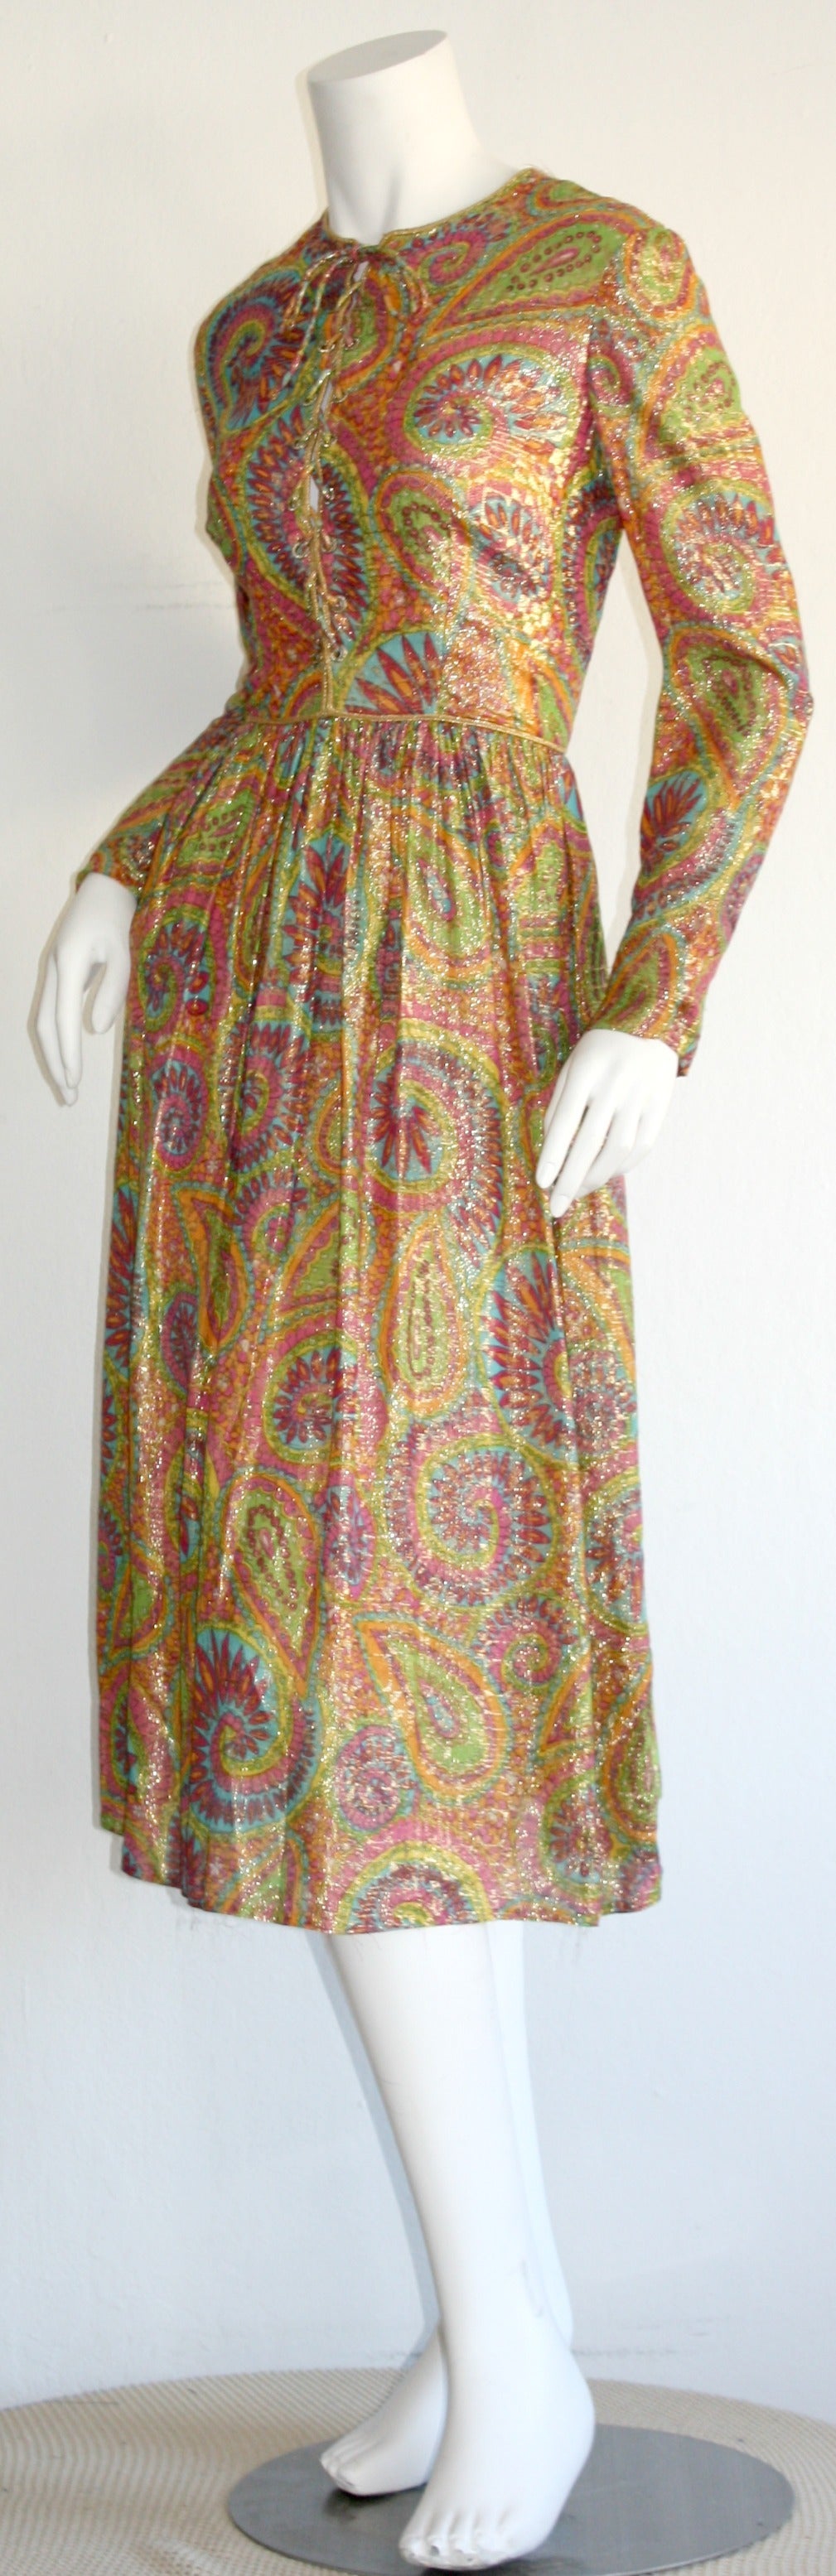 Amazing 1960s Vintage mollie Parnis Paisley Silk Metallic Babydoll Dress In Excellent Condition For Sale In San Diego, CA